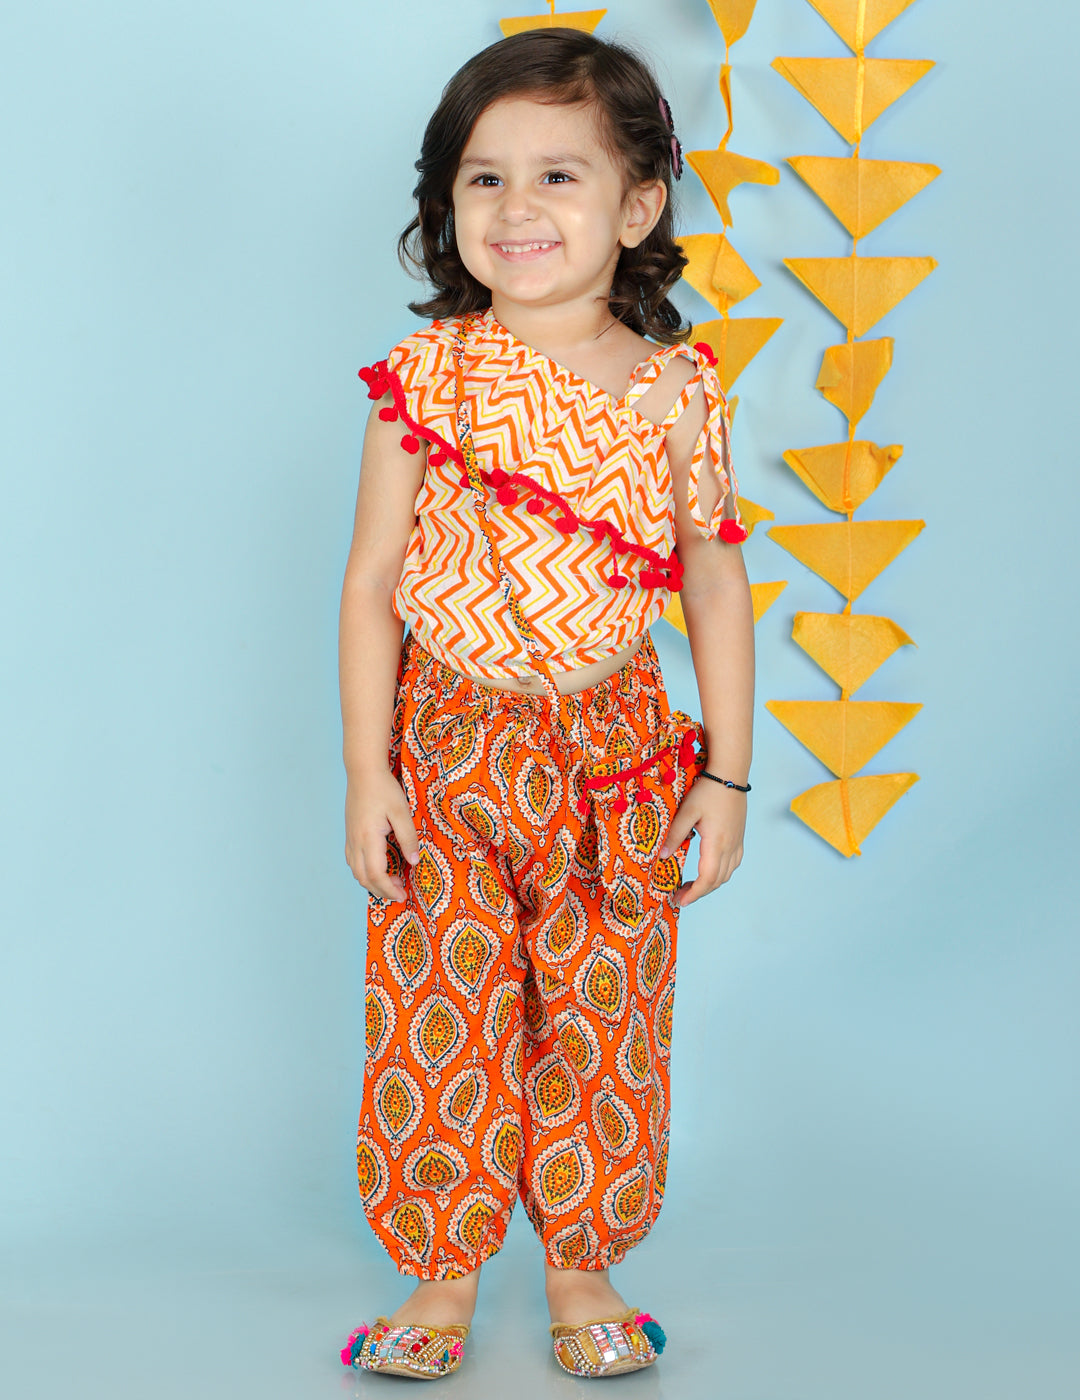 Girl's White/Orange Color Sassy Frill Top With Harem Pants And Bag - KID1 Girls